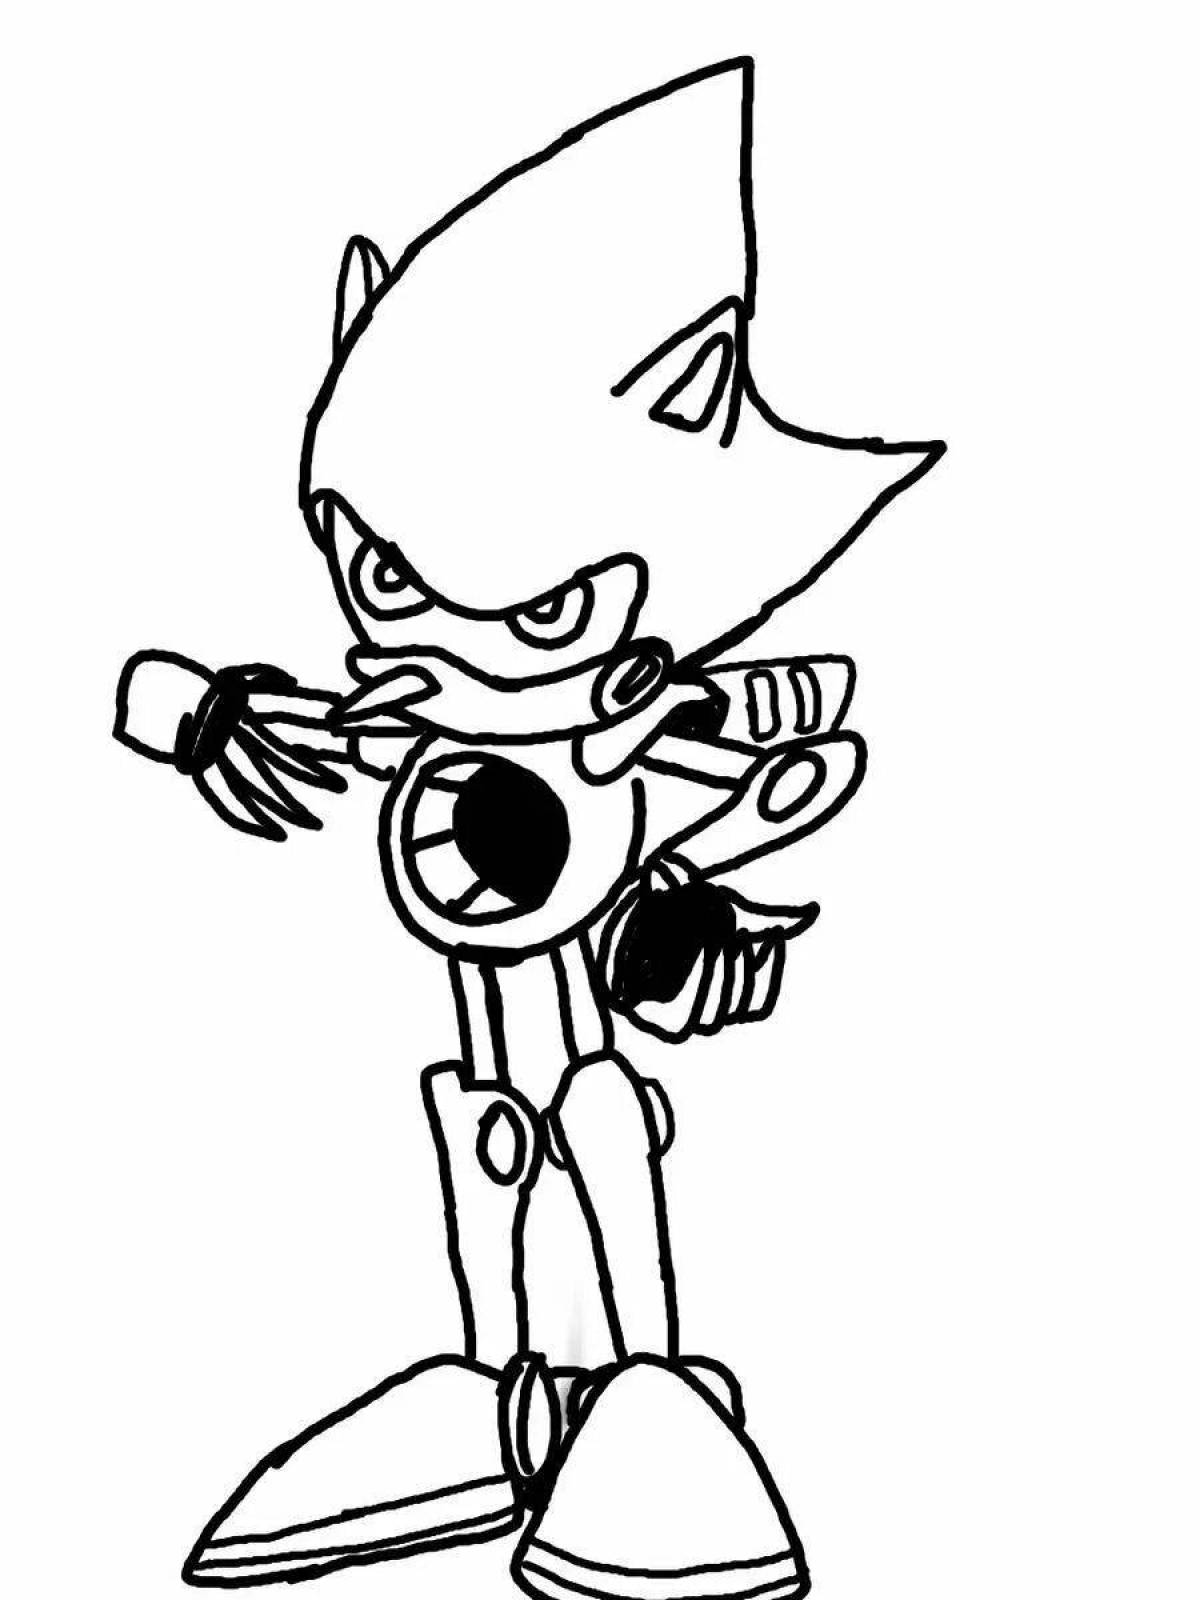 Sparkling sonic iron coloring book